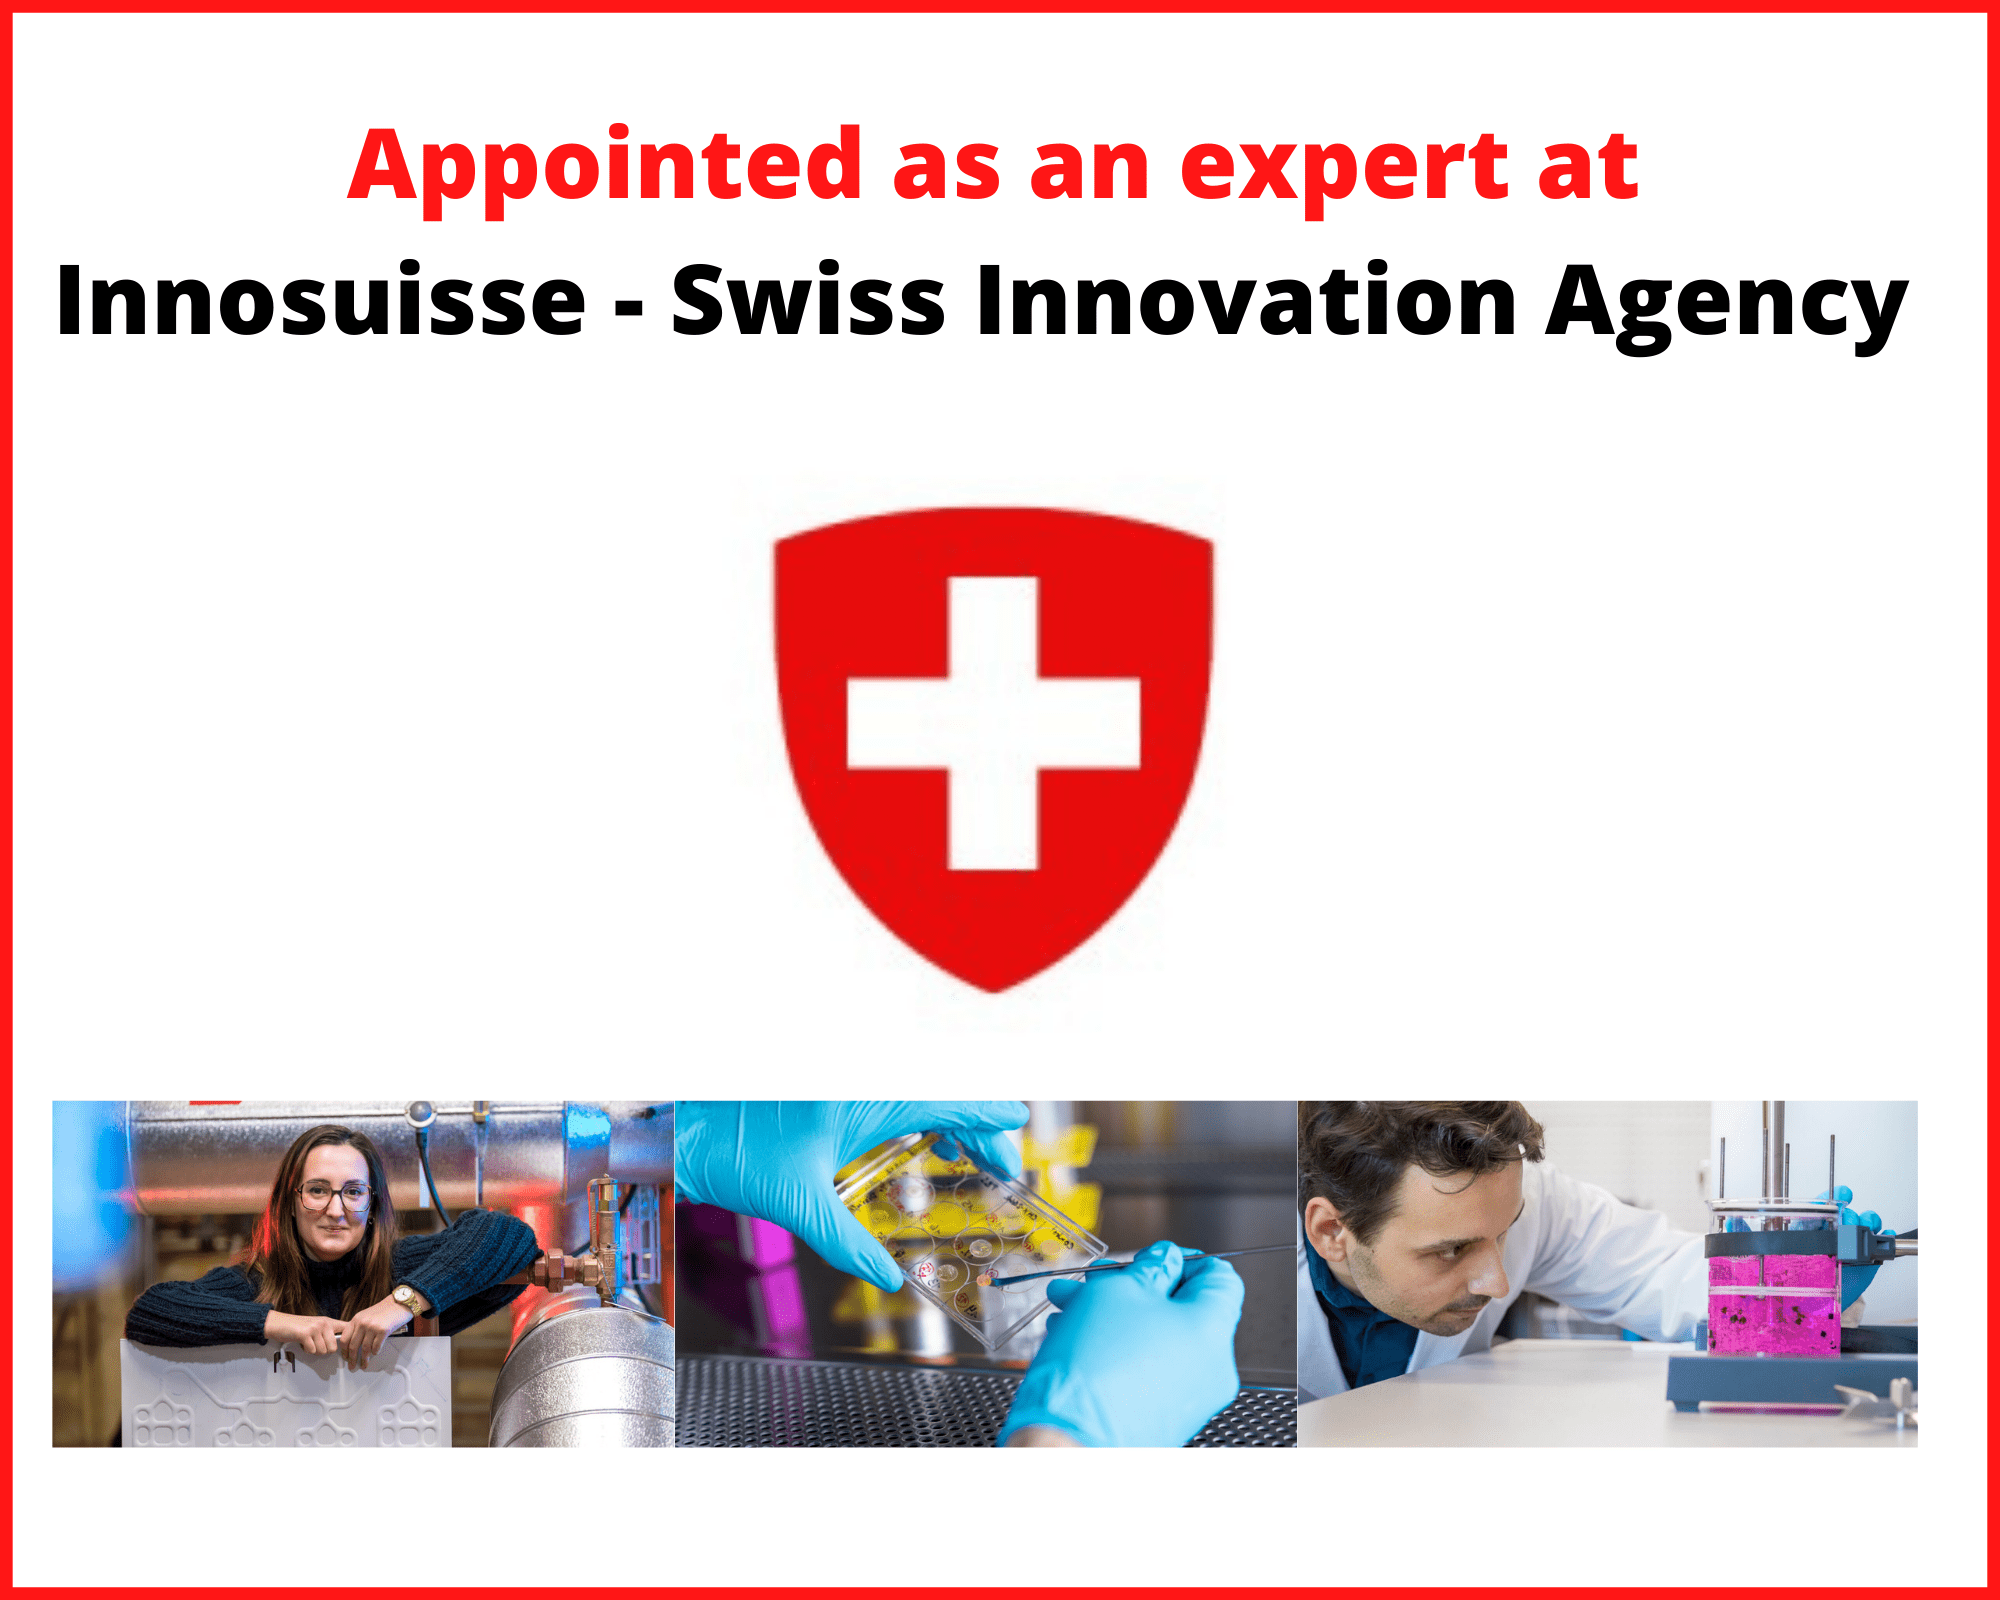 Stéphane Roecker is appointed expert at Innosuisse – Swiss Innovation Agency